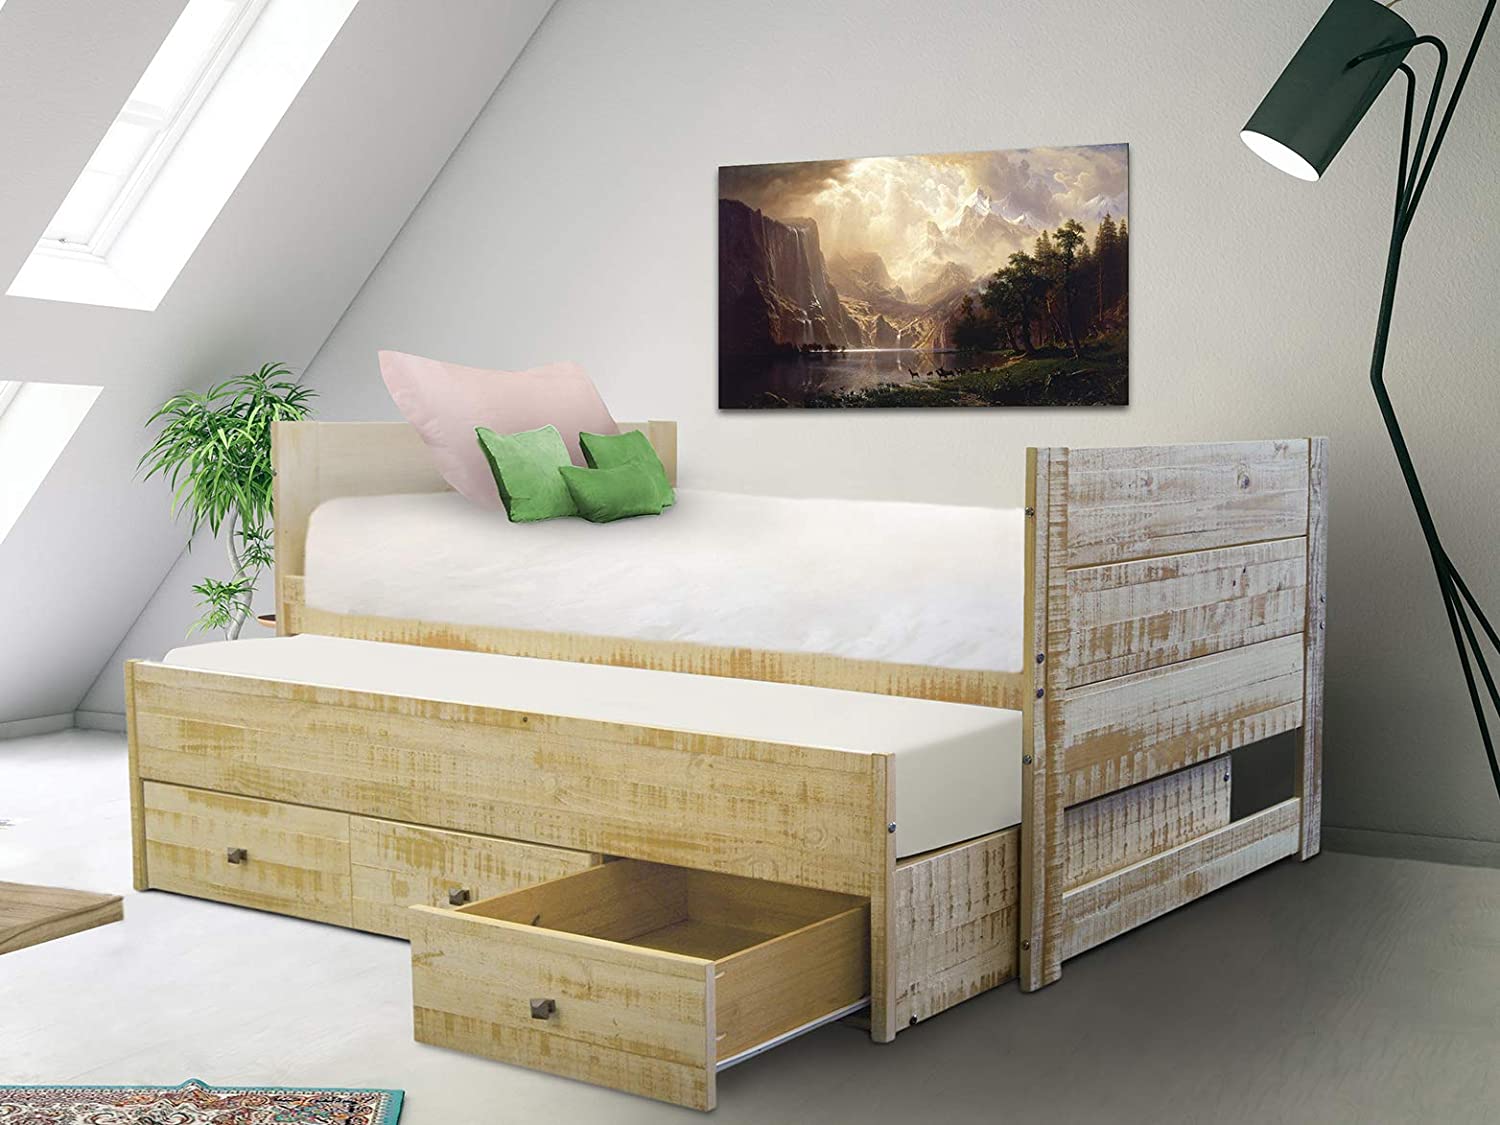 Different types to choose from while looking for twin bed with drawers